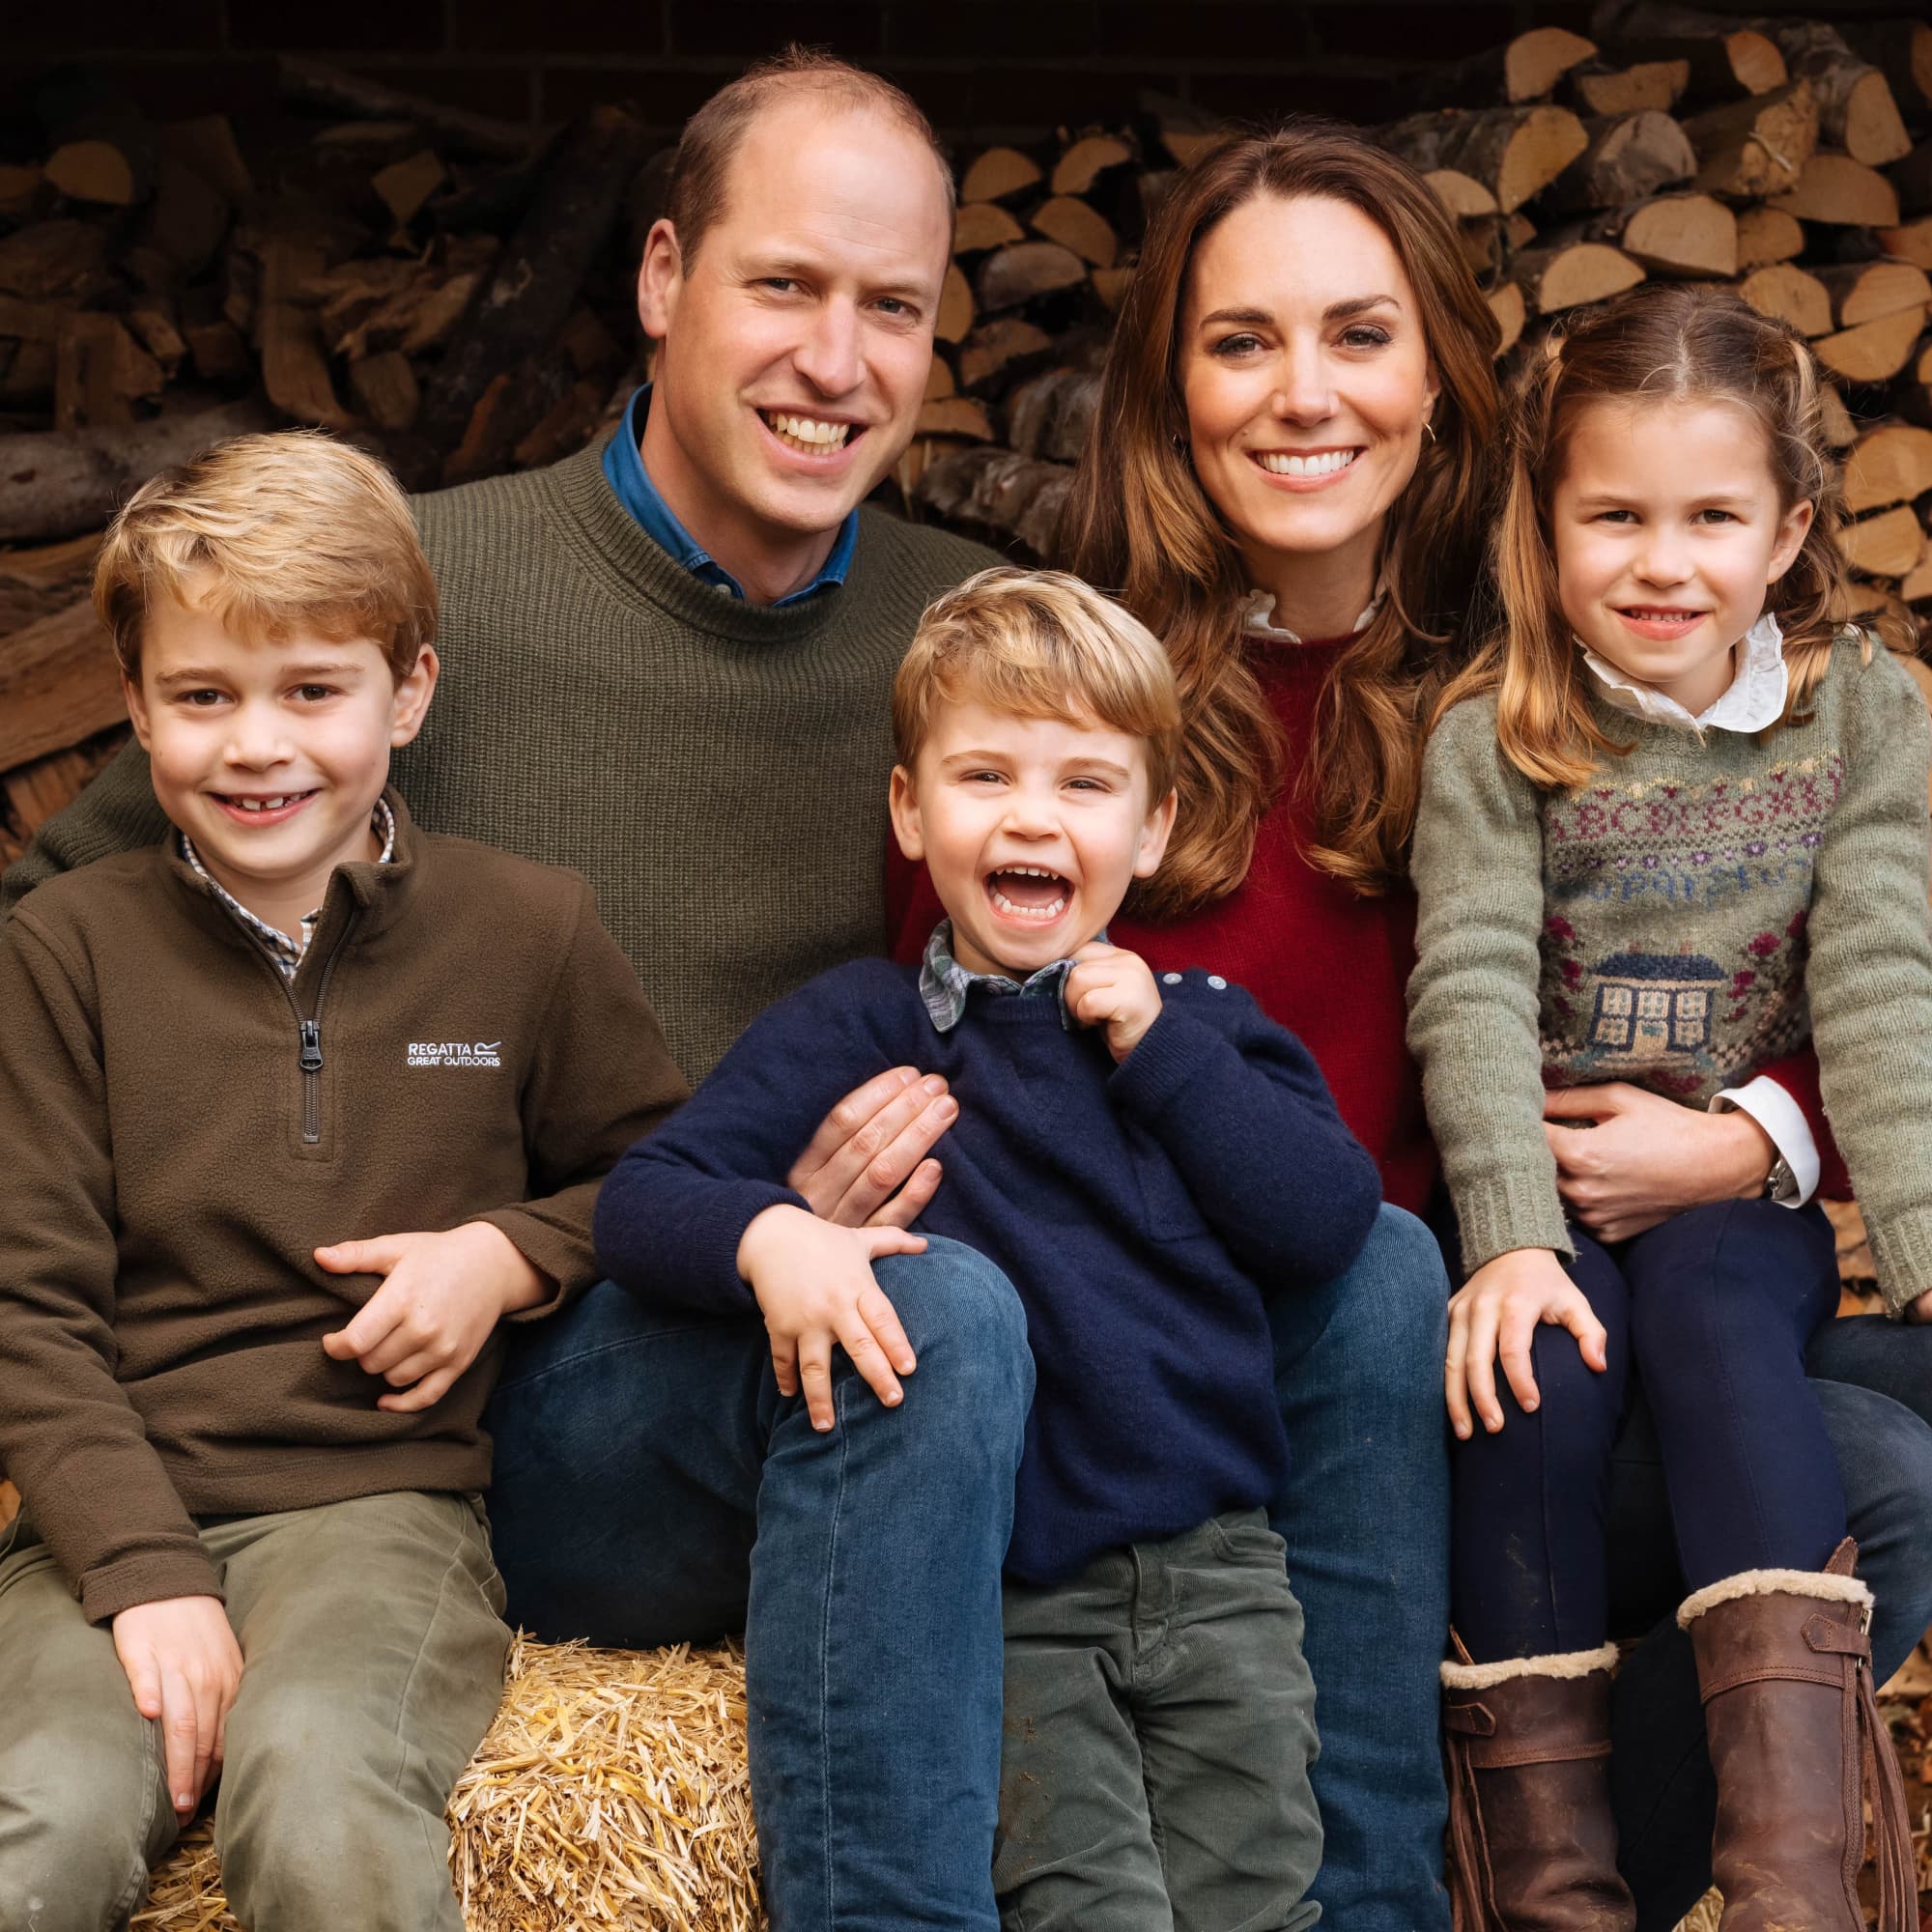 Prince William and Kate Middleton's Family Is All Smiles in Sweet